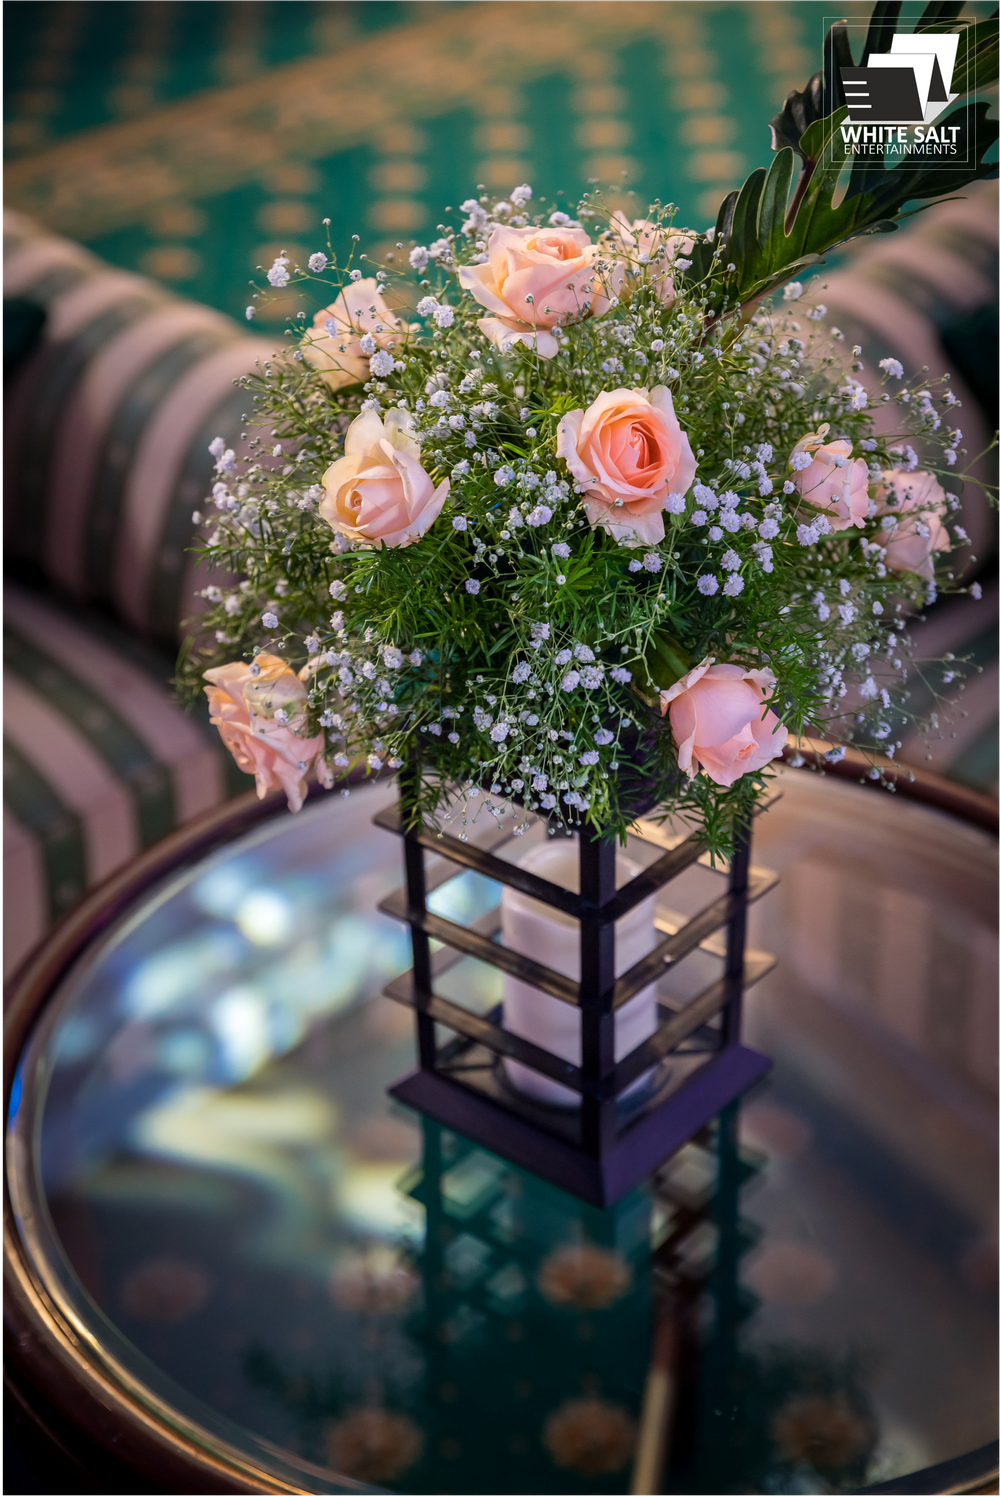 Photo From Delicate Florals - By White Salt Entertainments